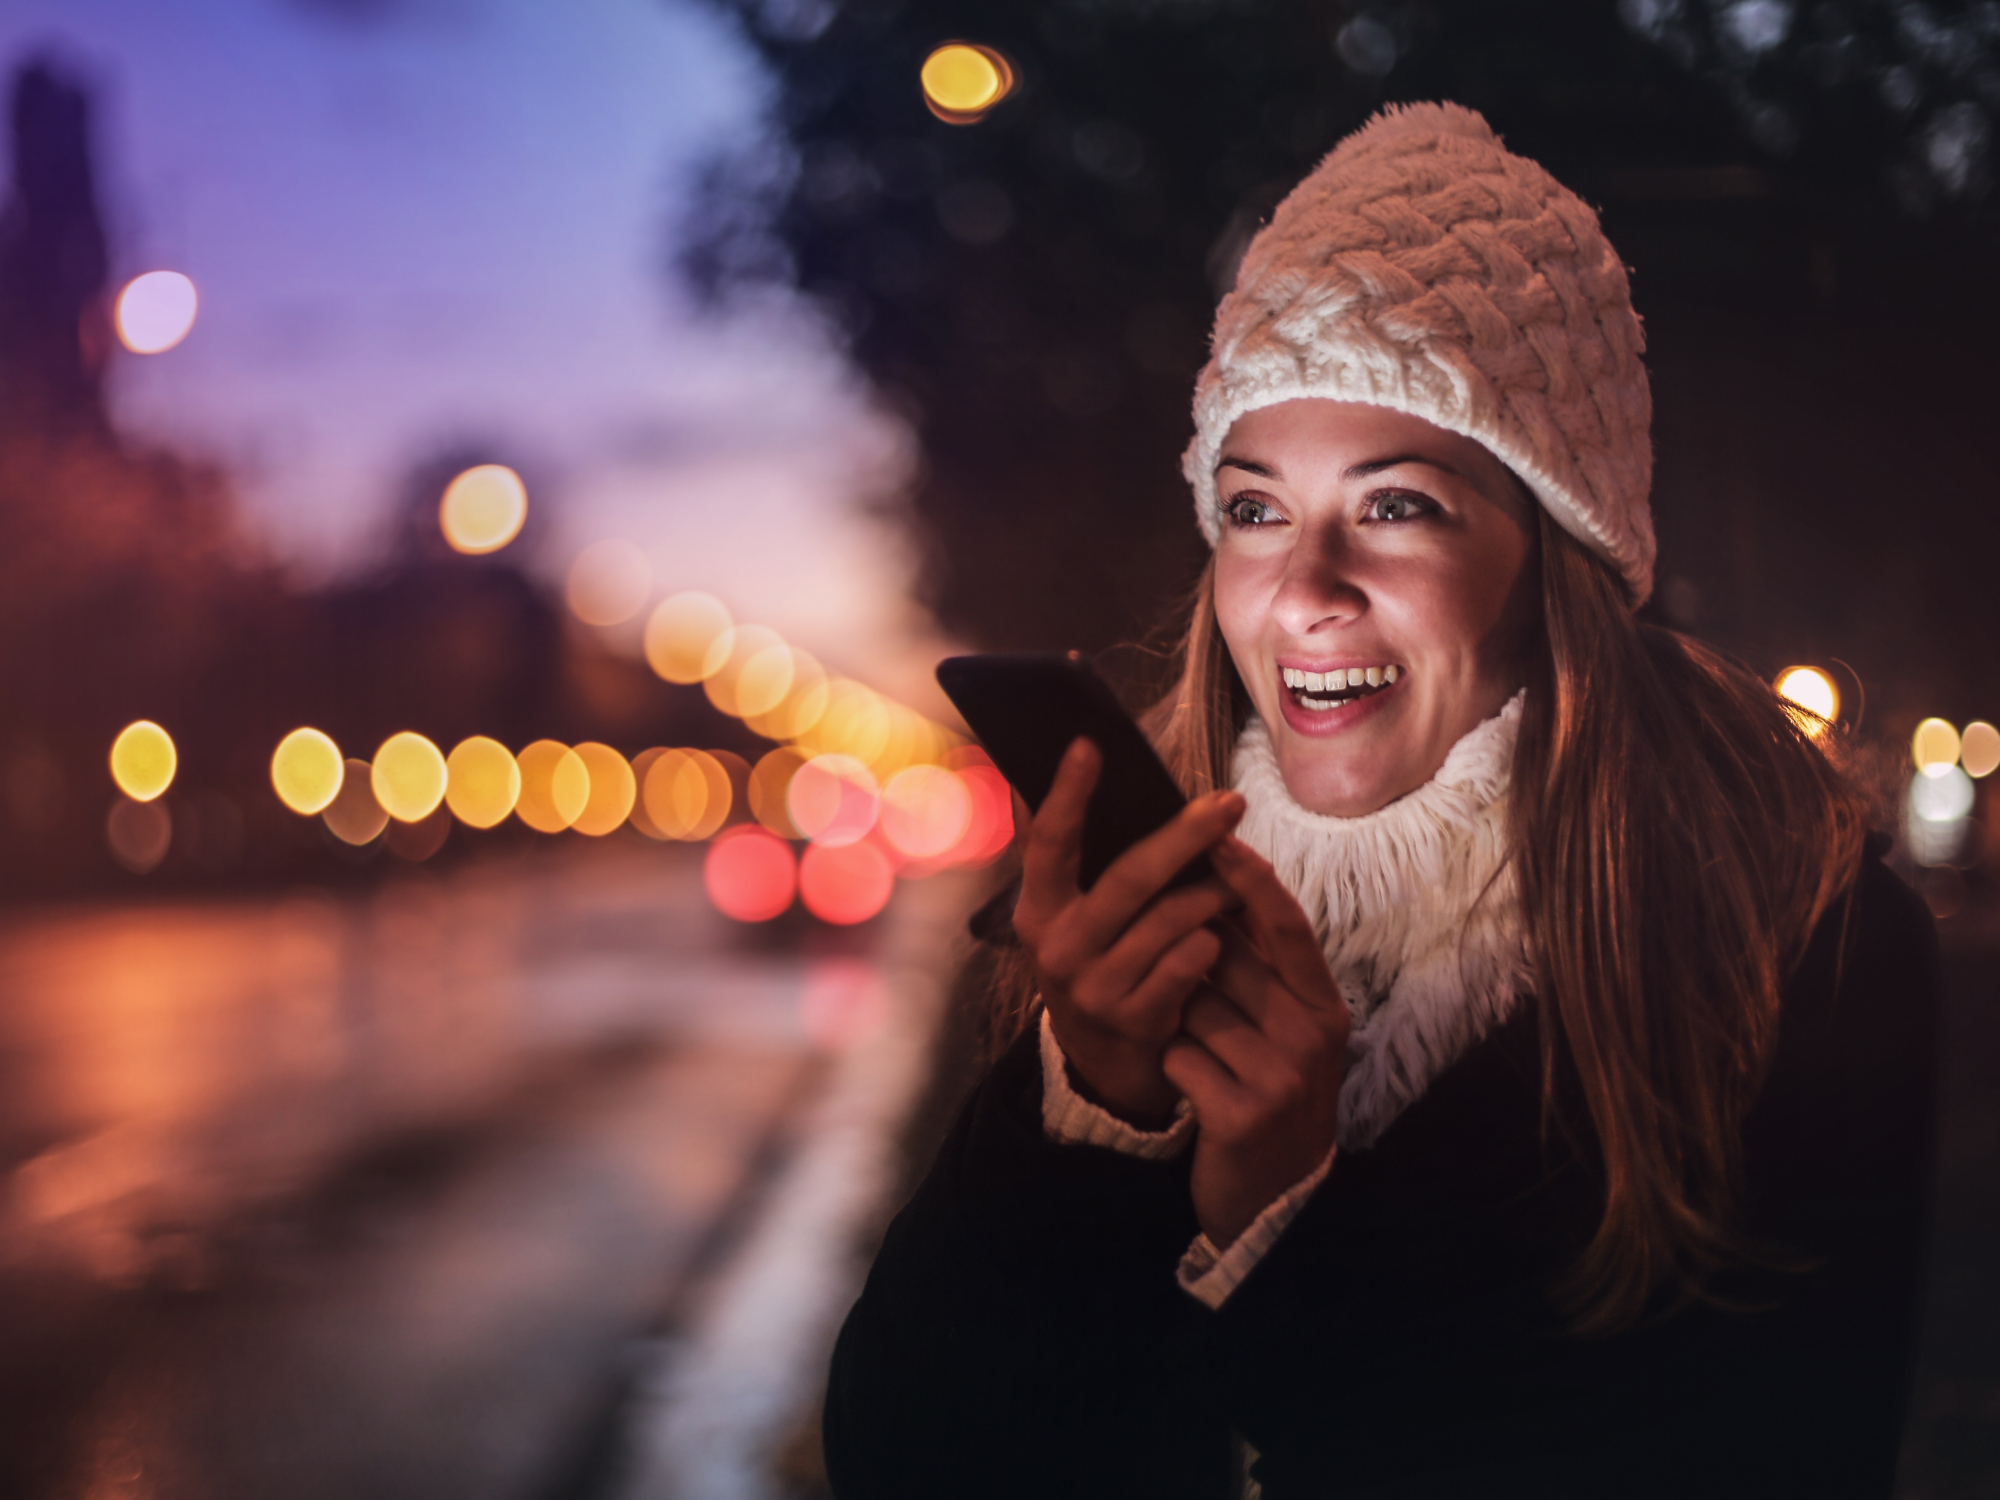 A woman wearing a white knit cap, a white sweater, and a jacket, talking into a phone at night by a street.